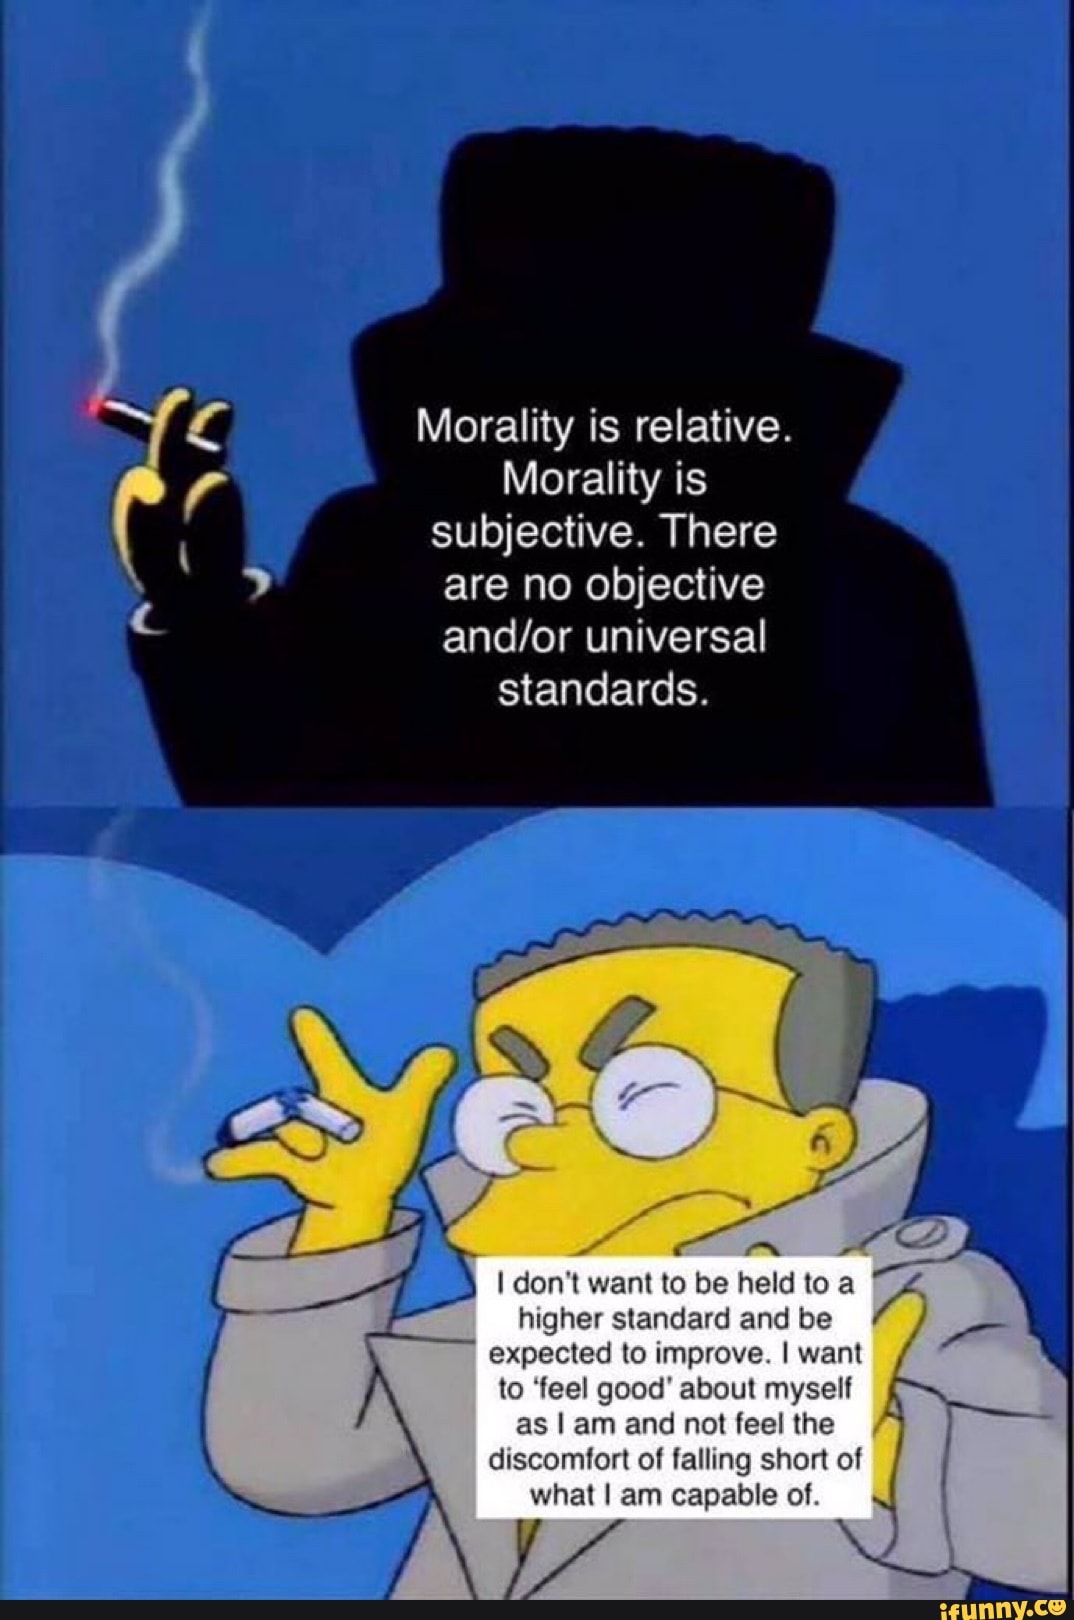 morality is subjective essay